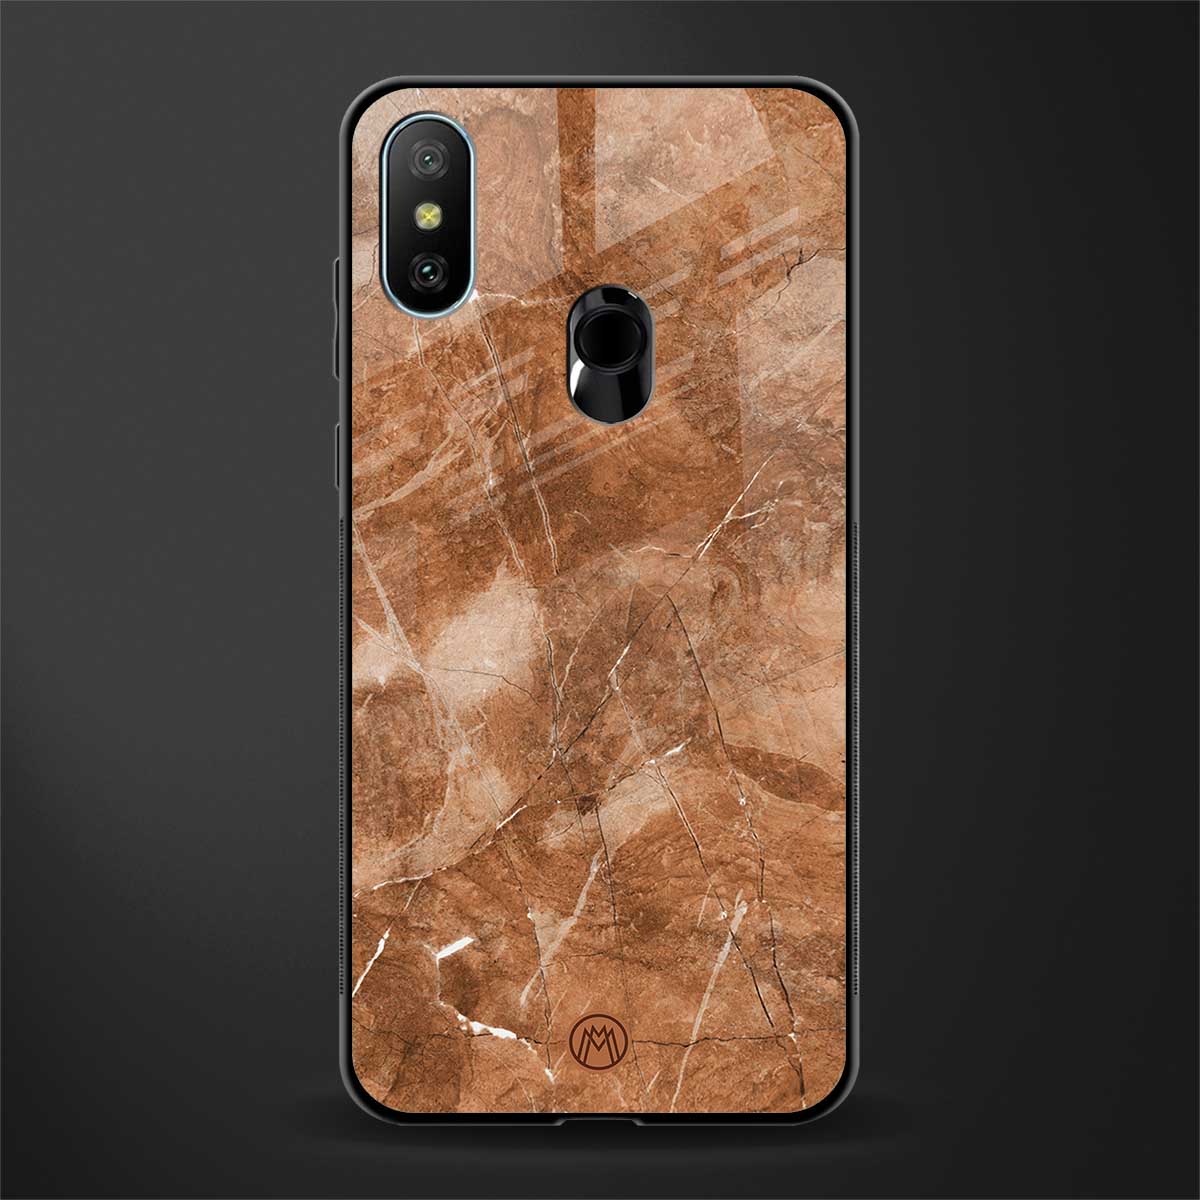 caramel brown marble glass case for redmi 6 pro image